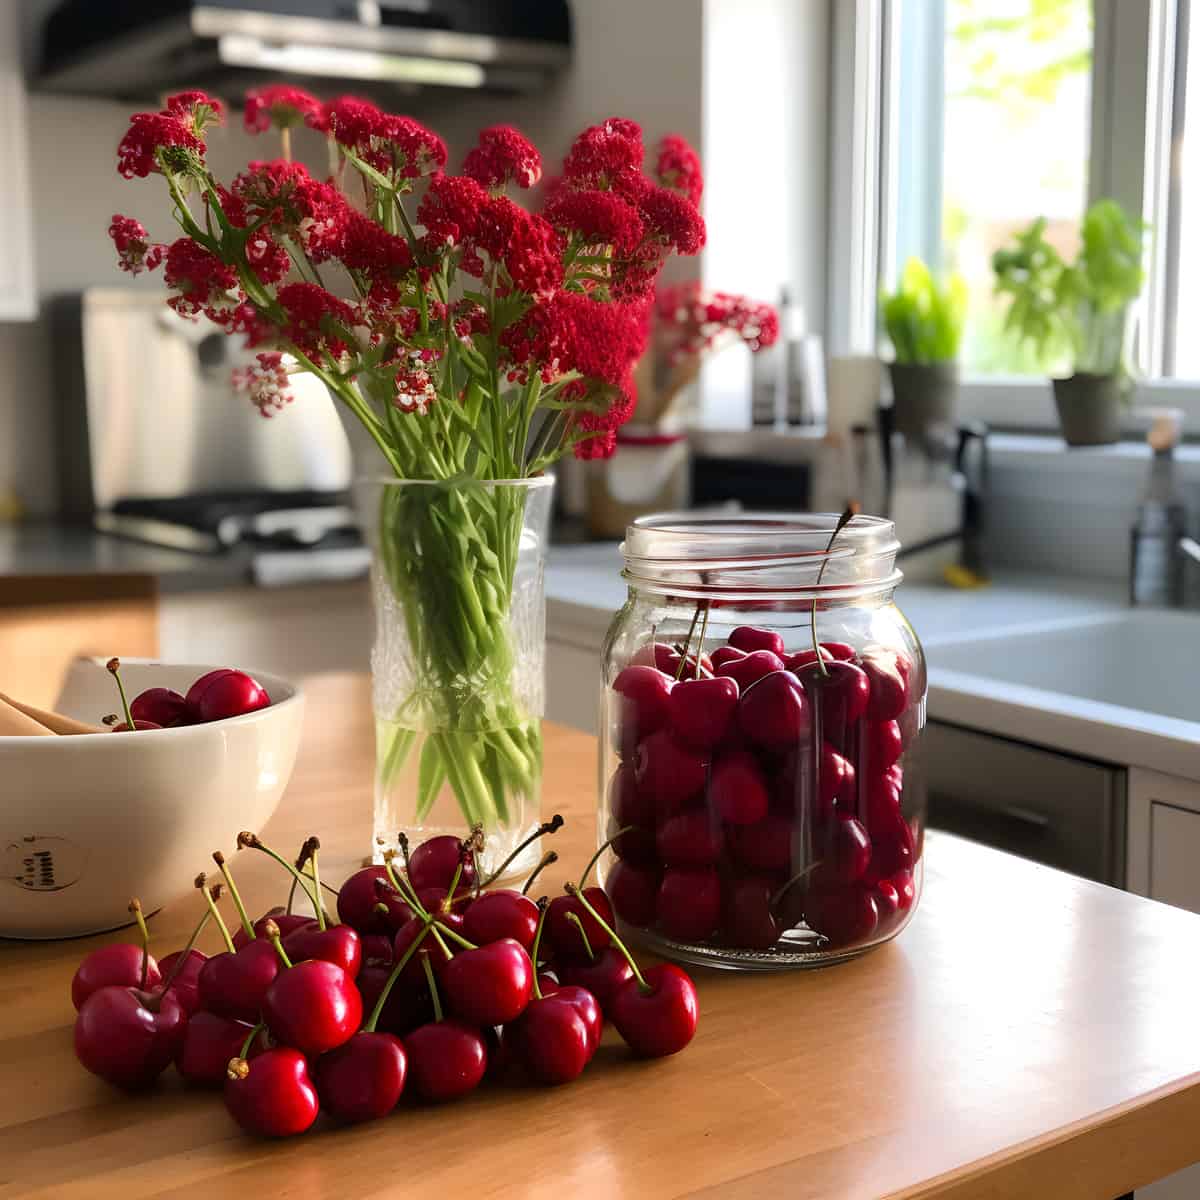 Cyclamin Cherries on a kitchen counter